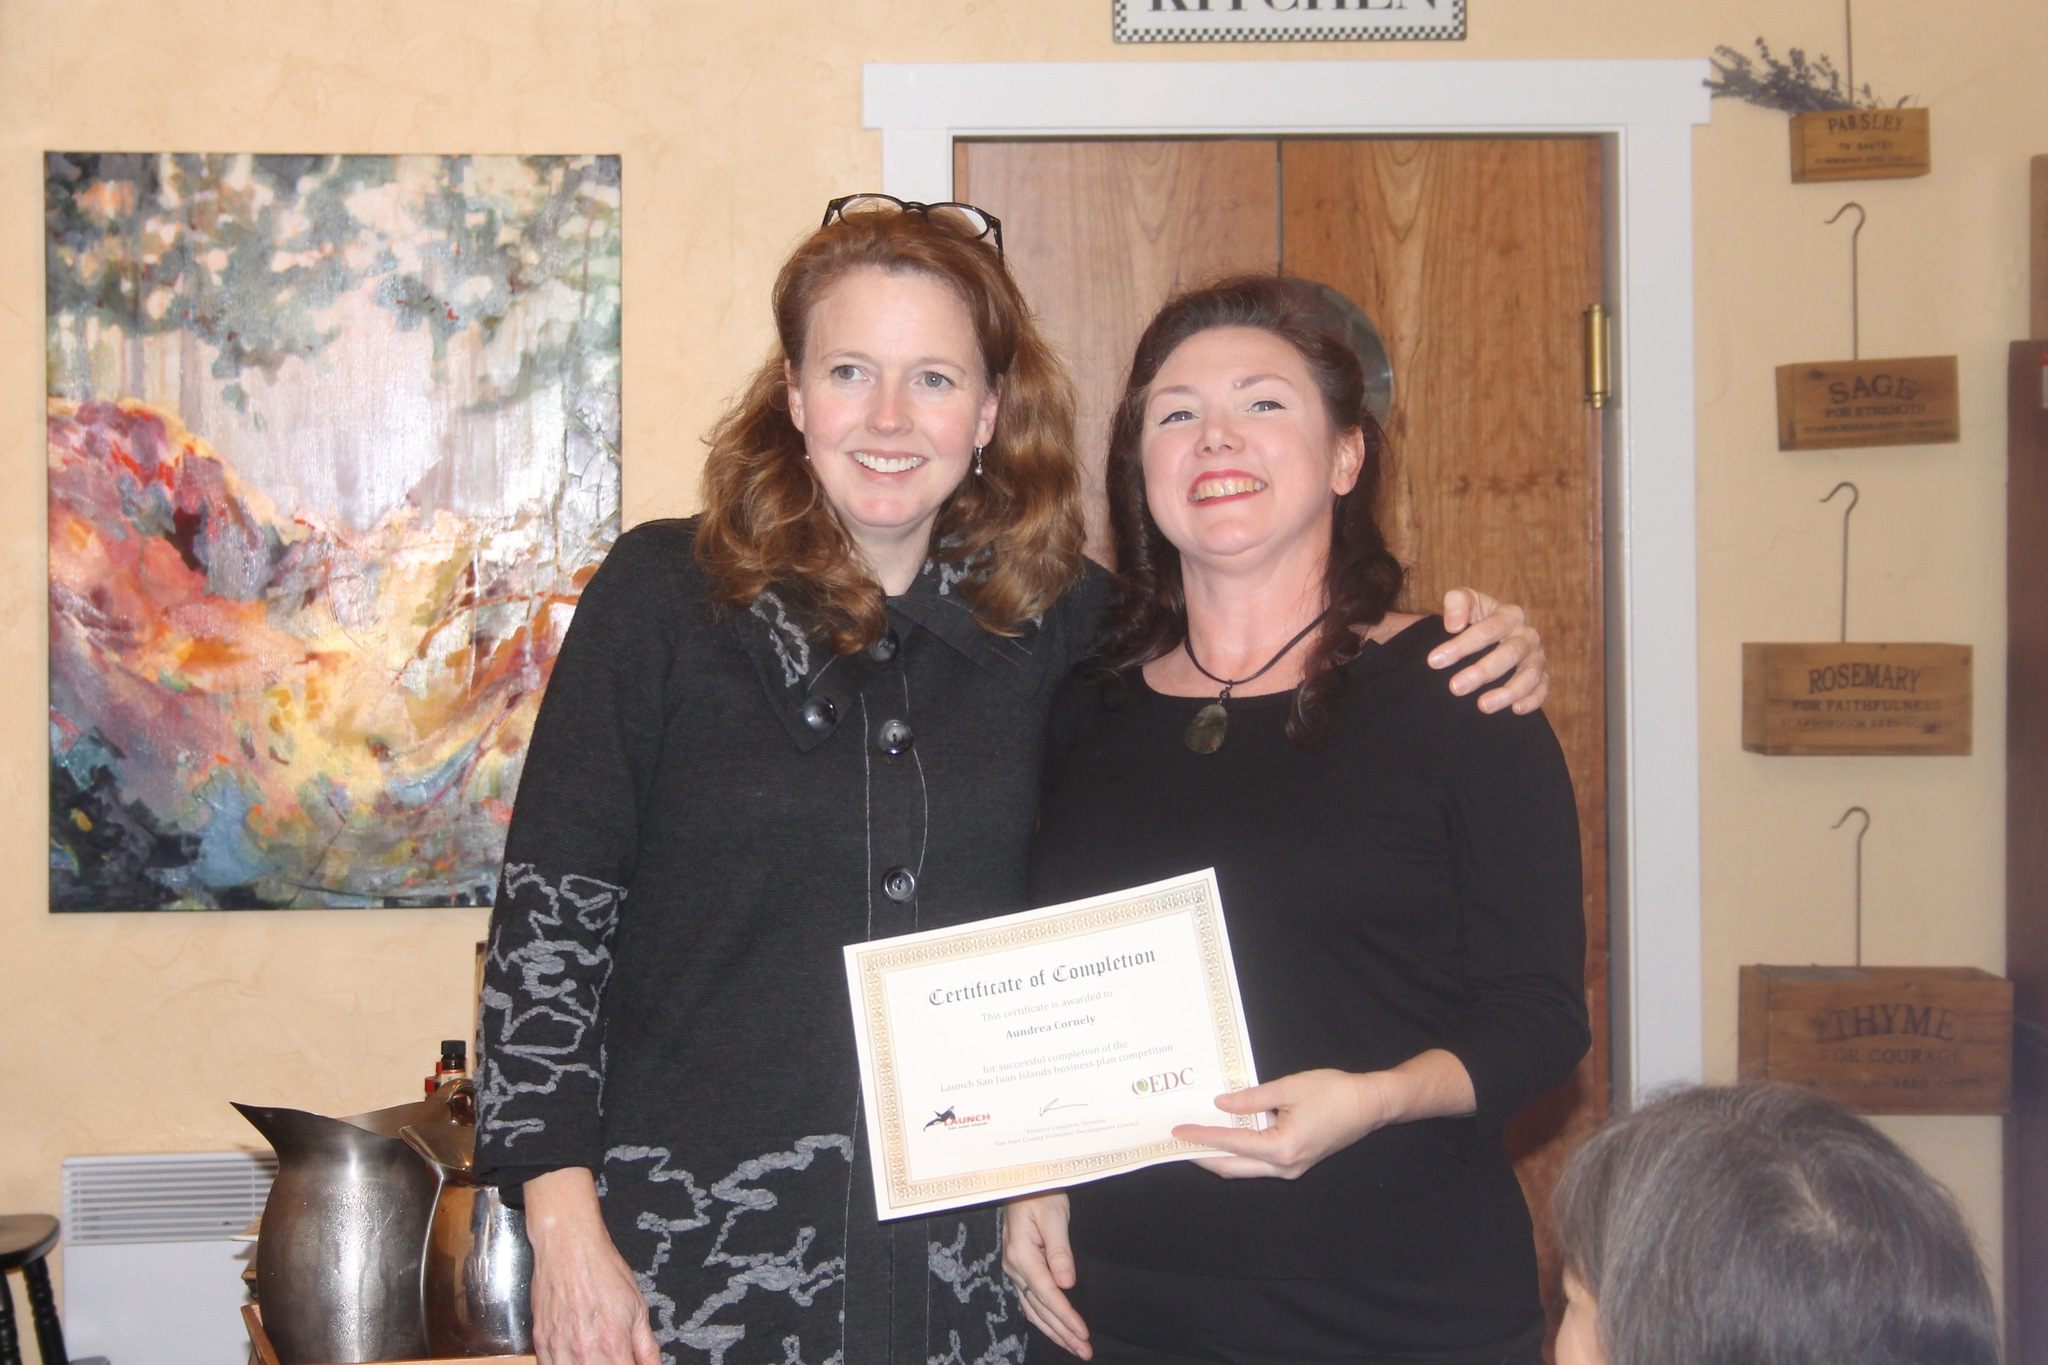 Aunde Cornely of San Juan Island receives third place in the 2016 Launch San Juan Islands business competition and $500 for her boudoir photography company called Embodied Spirit.